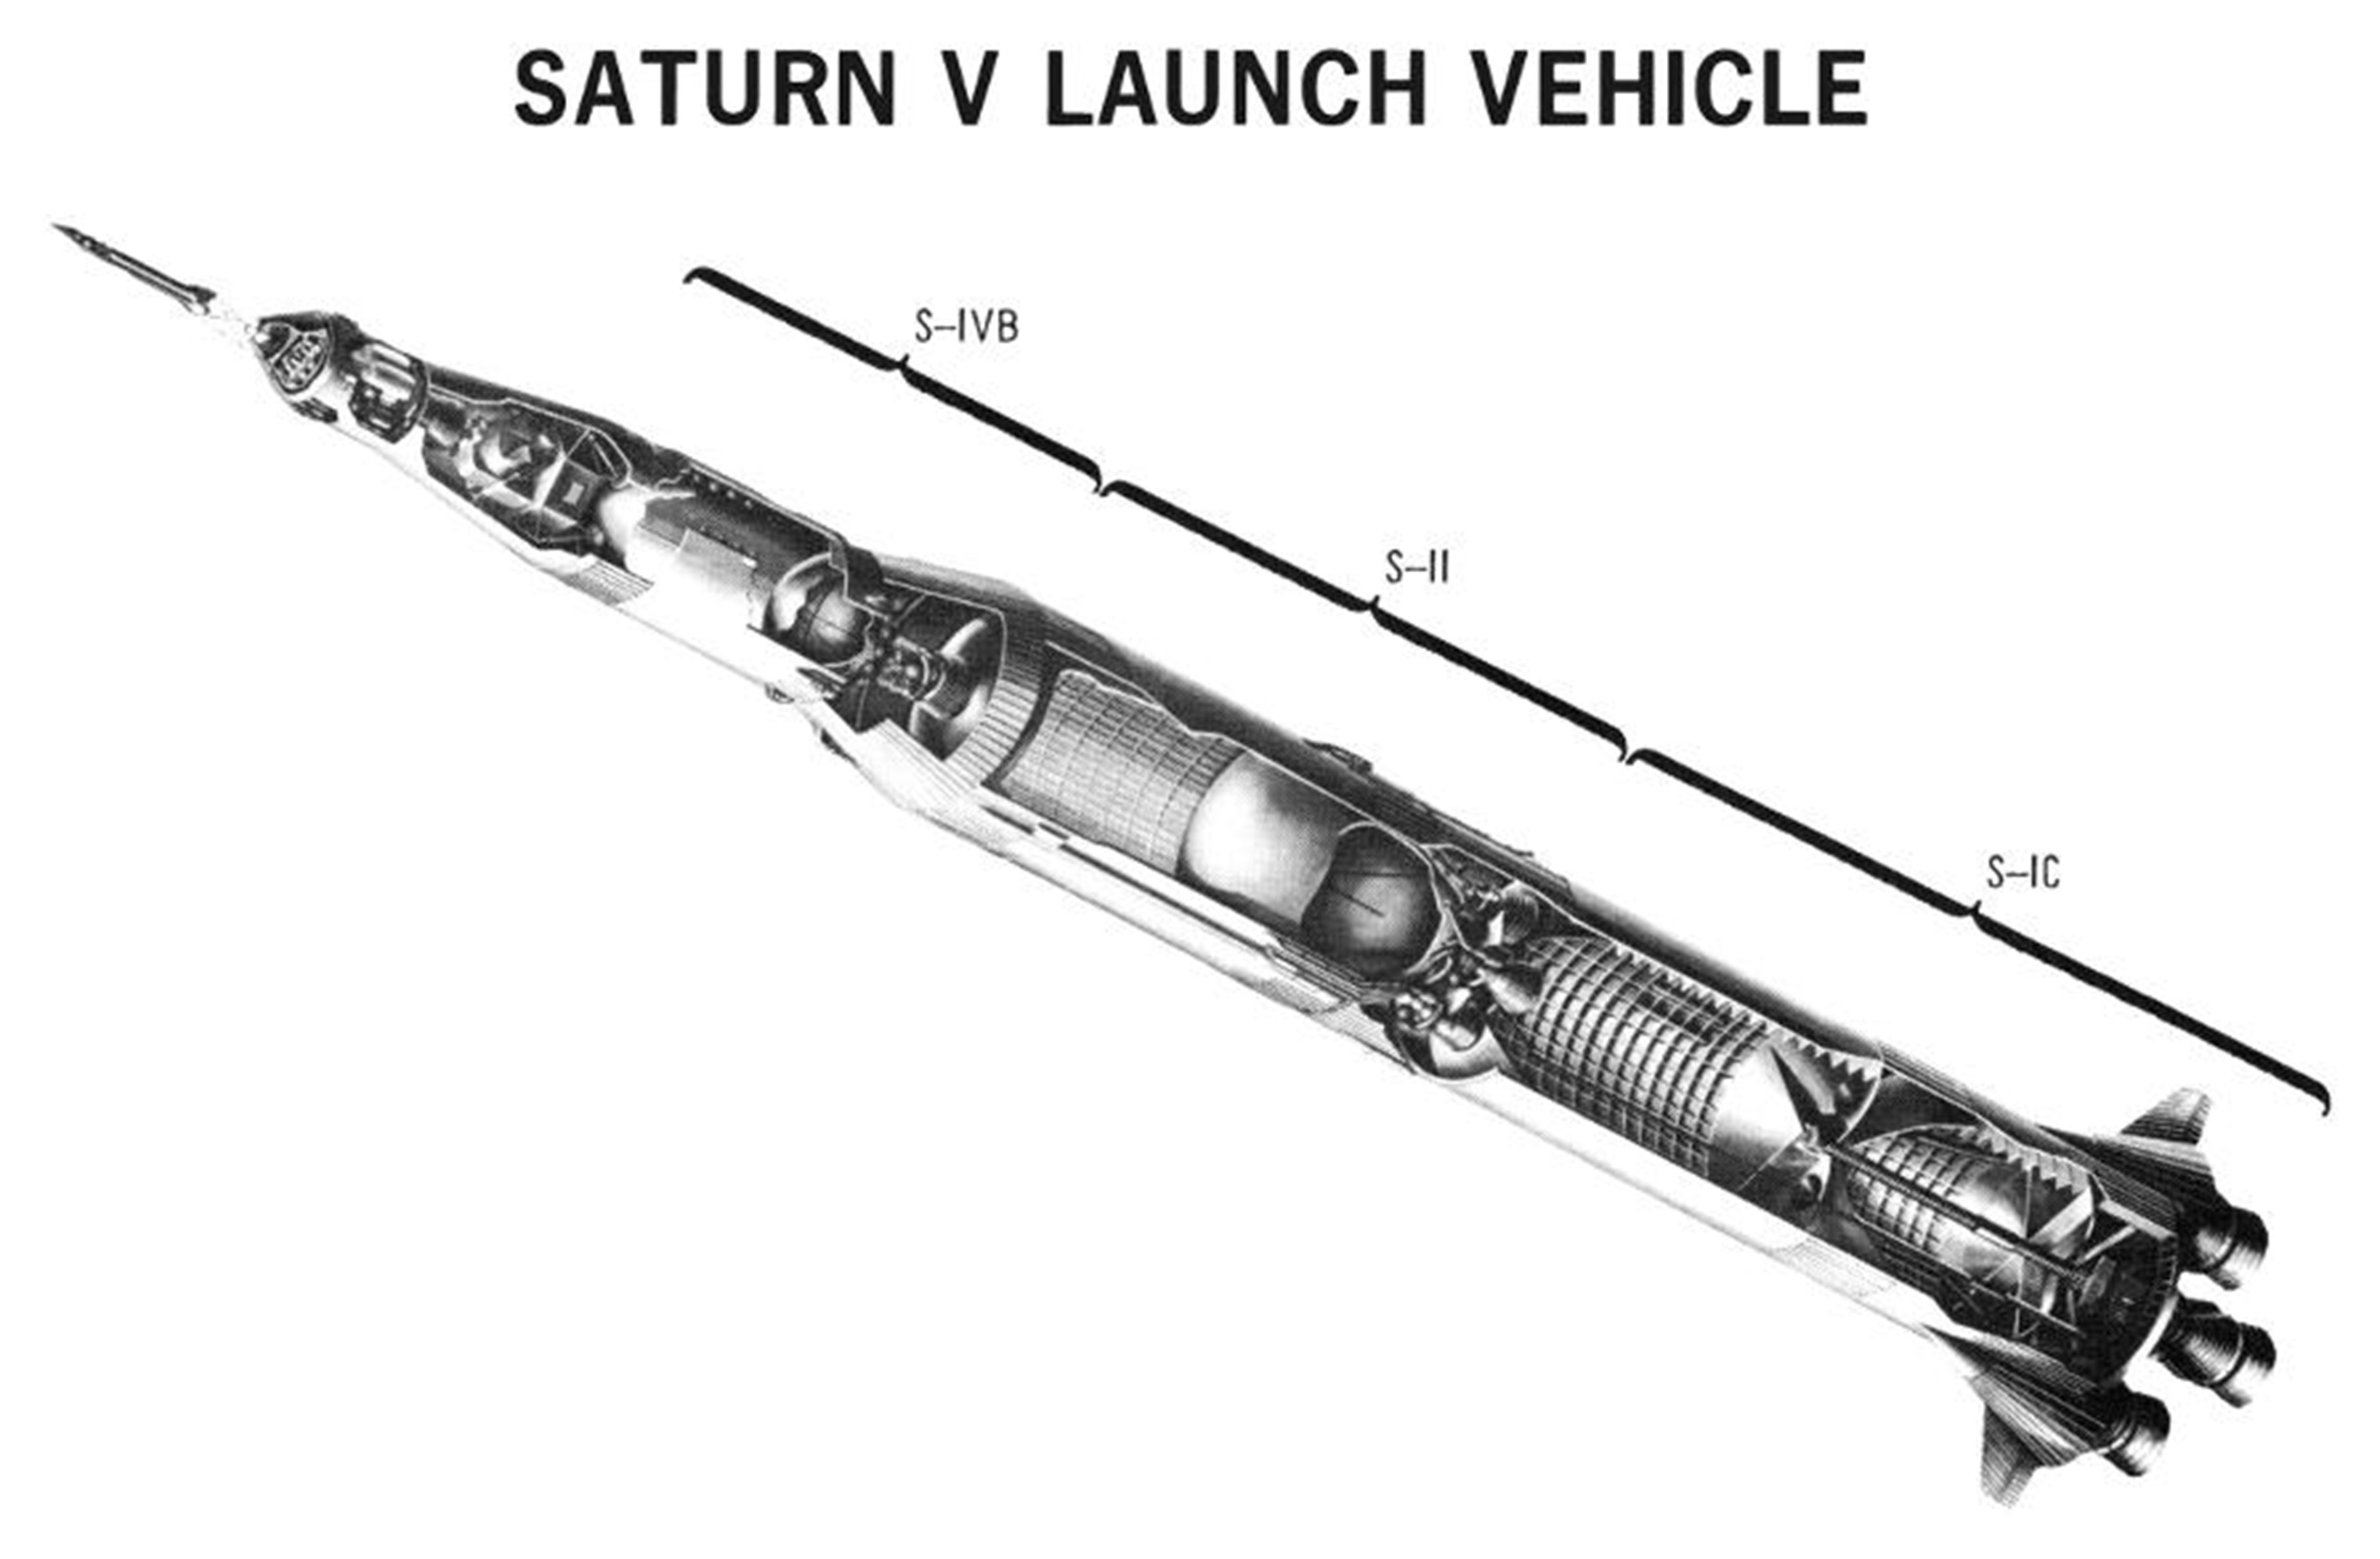 Figure 2: Adapted from page 26 of the S-IVB Saturn High Energy Upper Stage and its Development (Douglas Paper No. 4040), located in the Saturn V collection, 